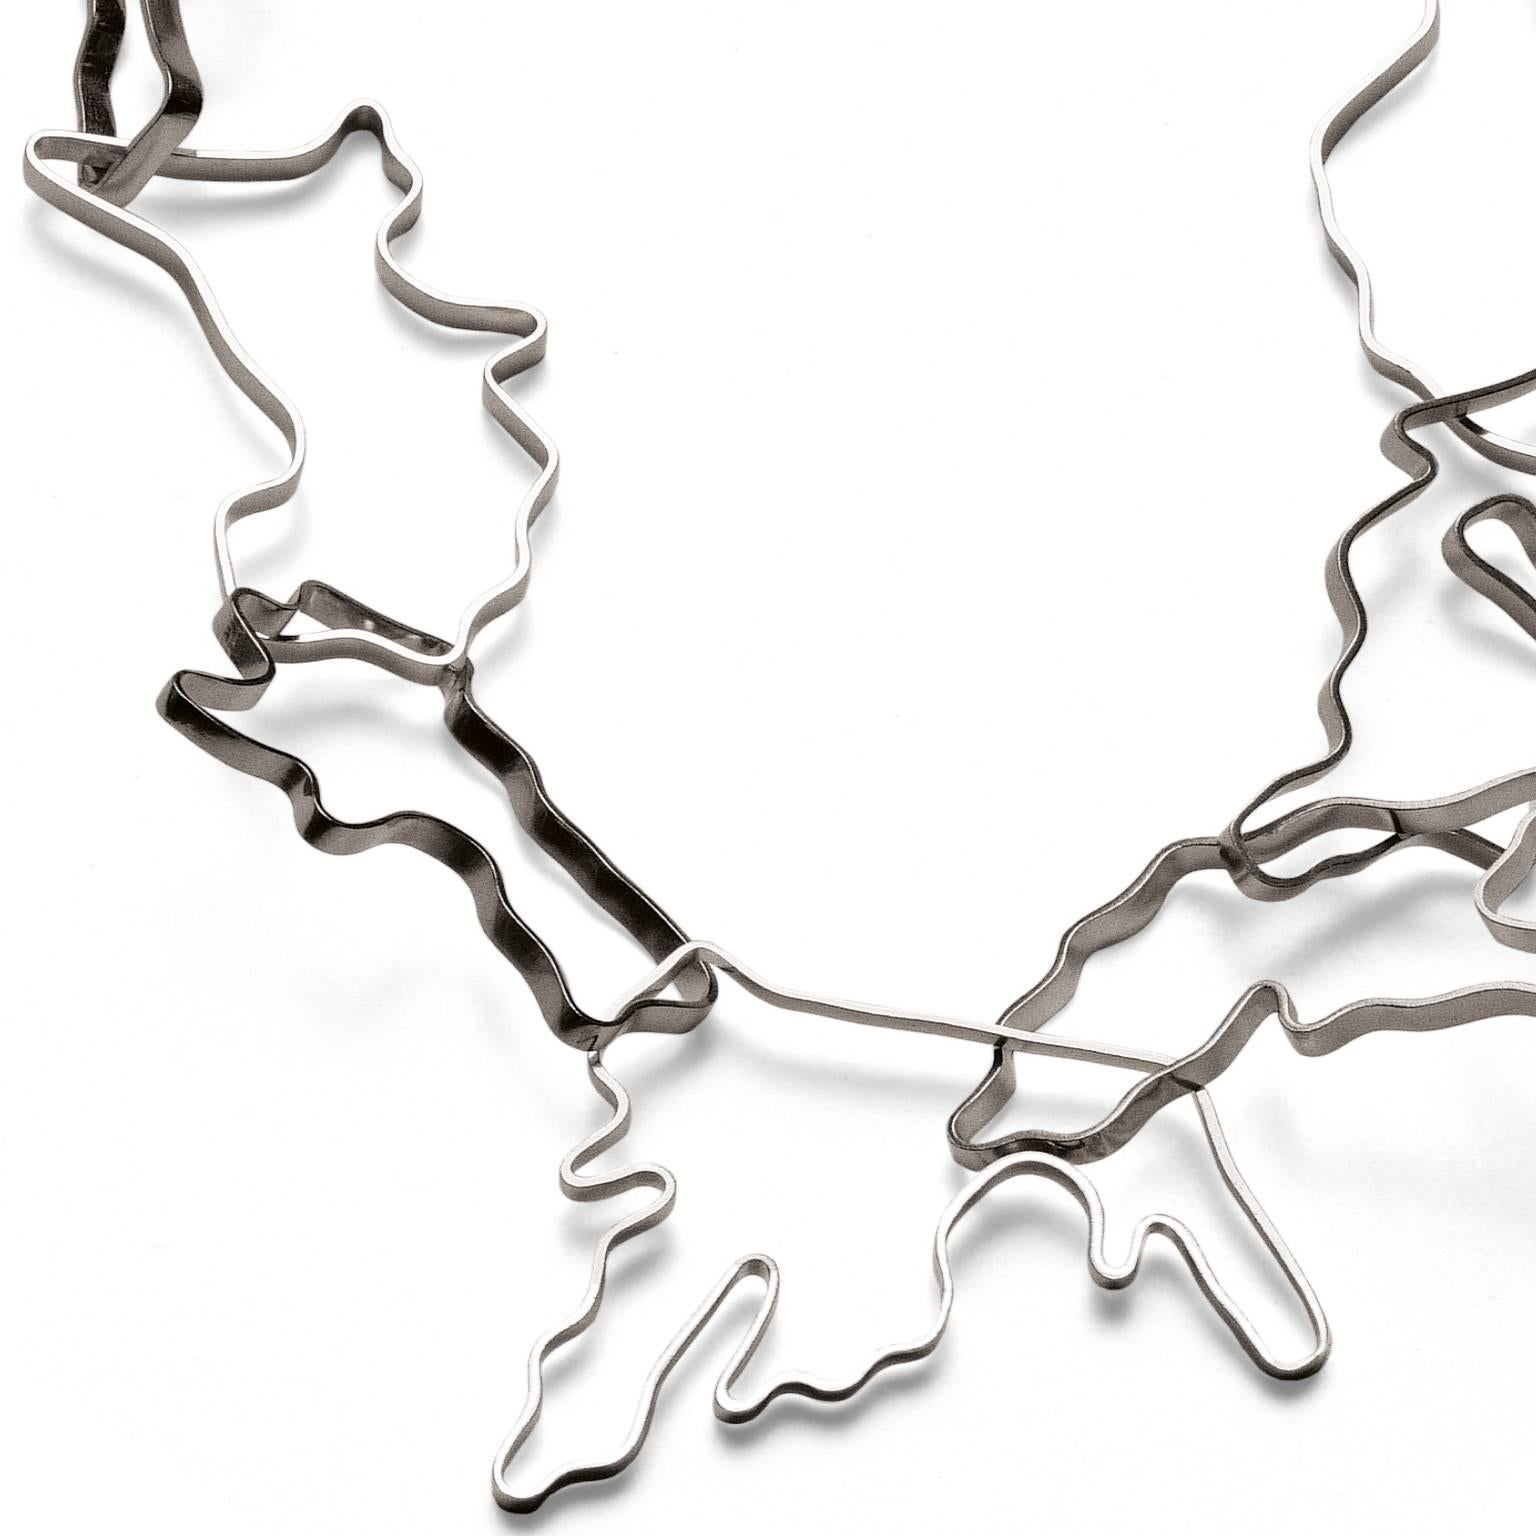 Contemporary Nathalie Jean Sterling Silver Limited Edition Small Chain Link Necklace